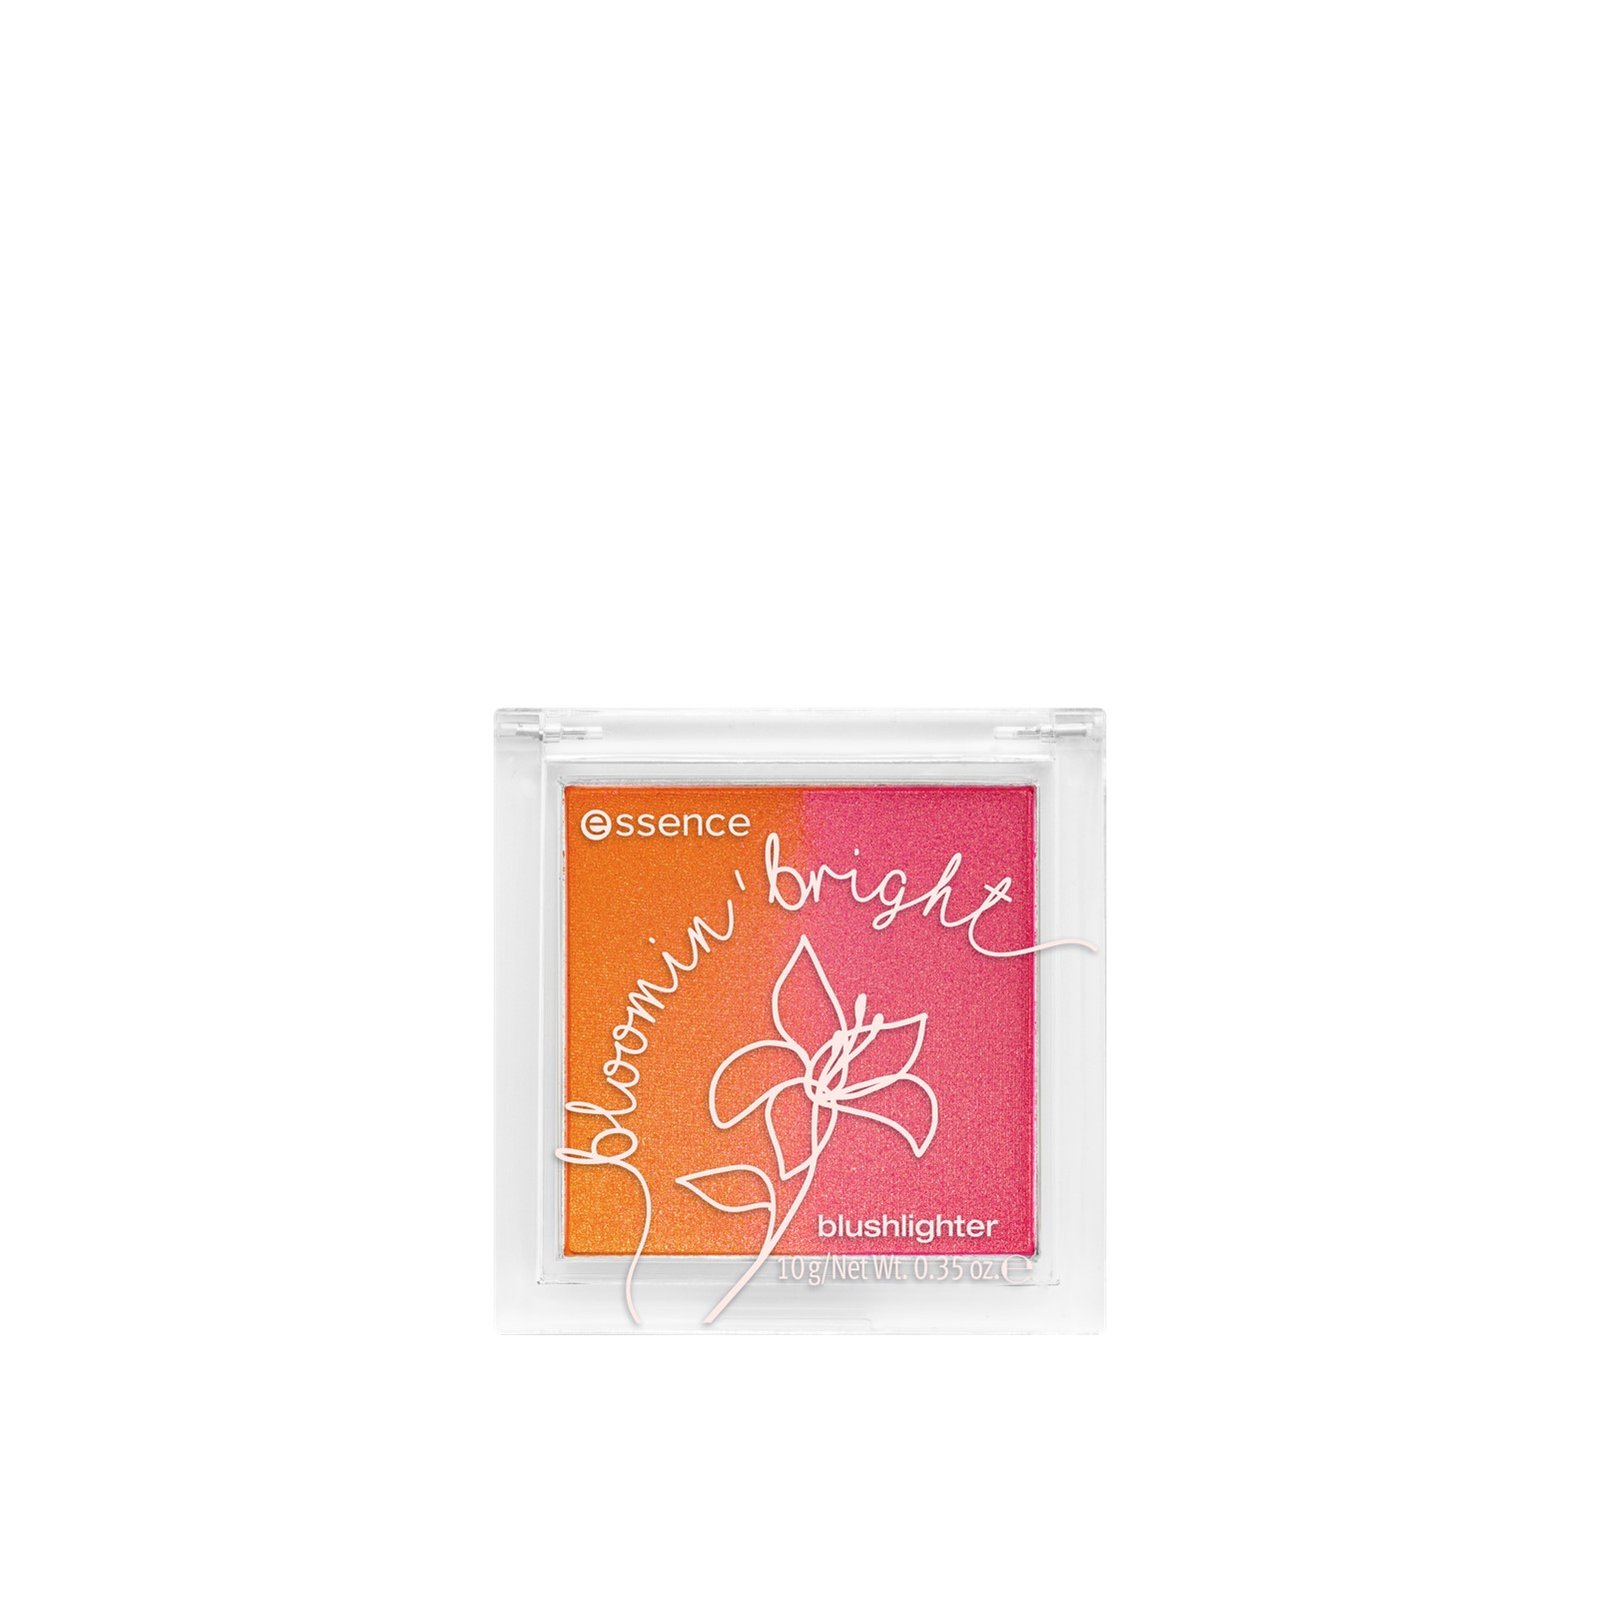 essence Bloomin' Bright Blushlighter 01 Bloom With Me! 10g